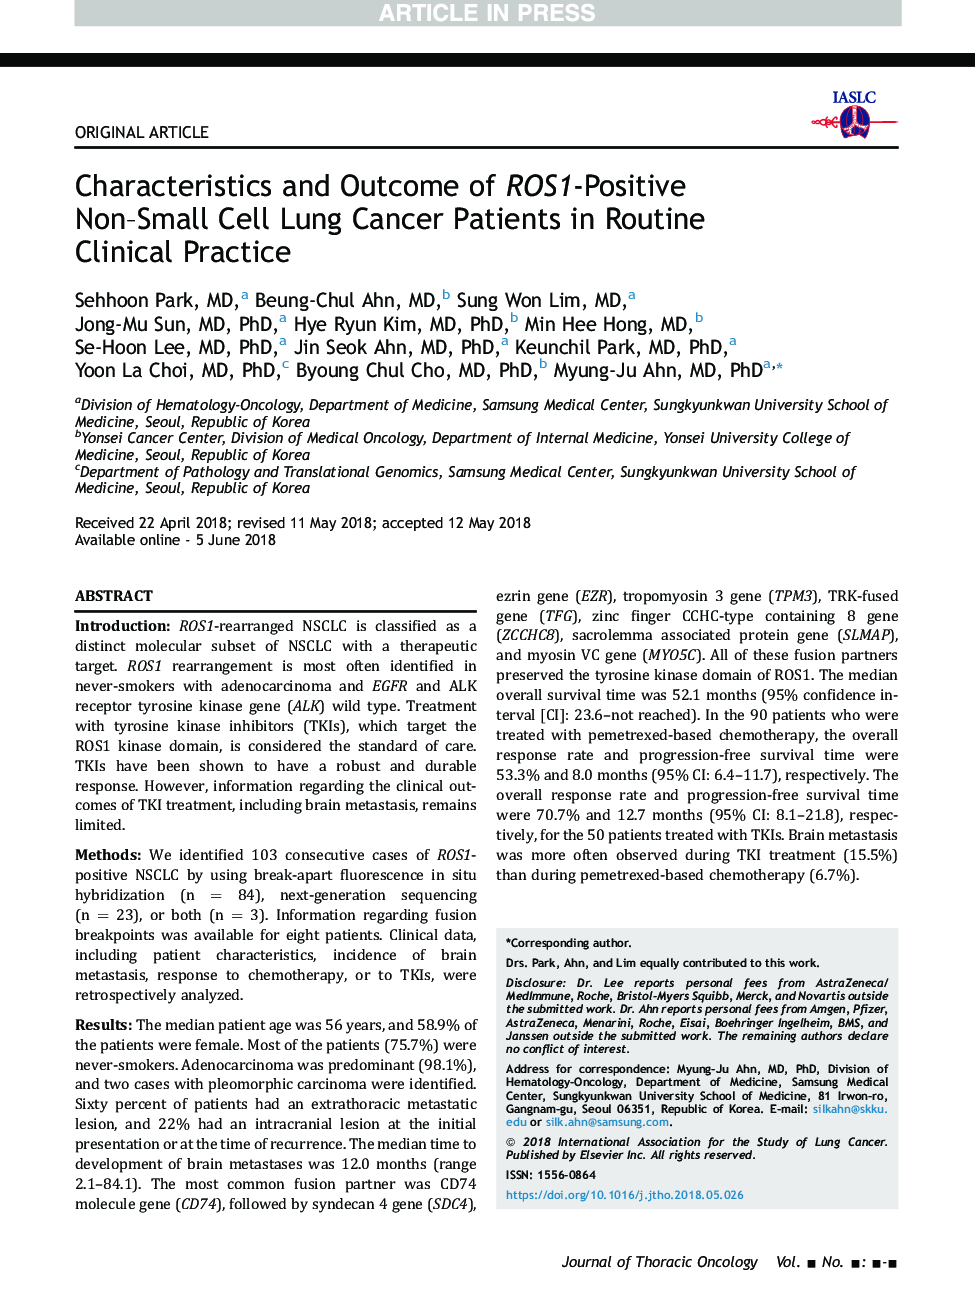 Characteristics and Outcome of ROS1-Positive Non-Small Cell Lung Cancer Patients in Routine Clinical Practice